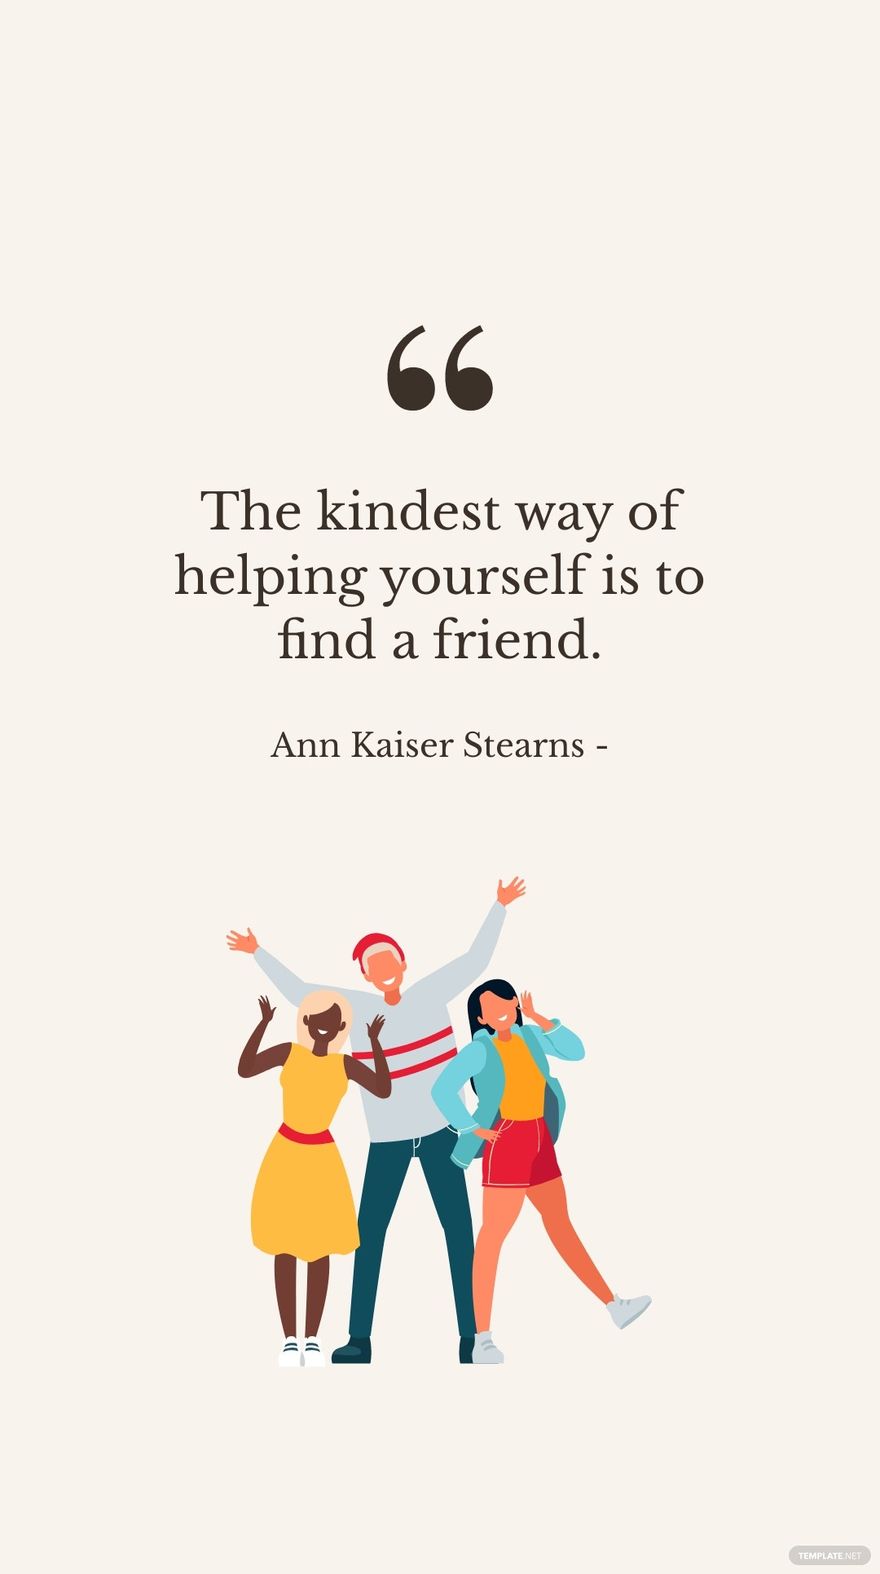 Free Ann Kaiser Stearns - The kindest way of helping yourself is to find a friend. in JPG